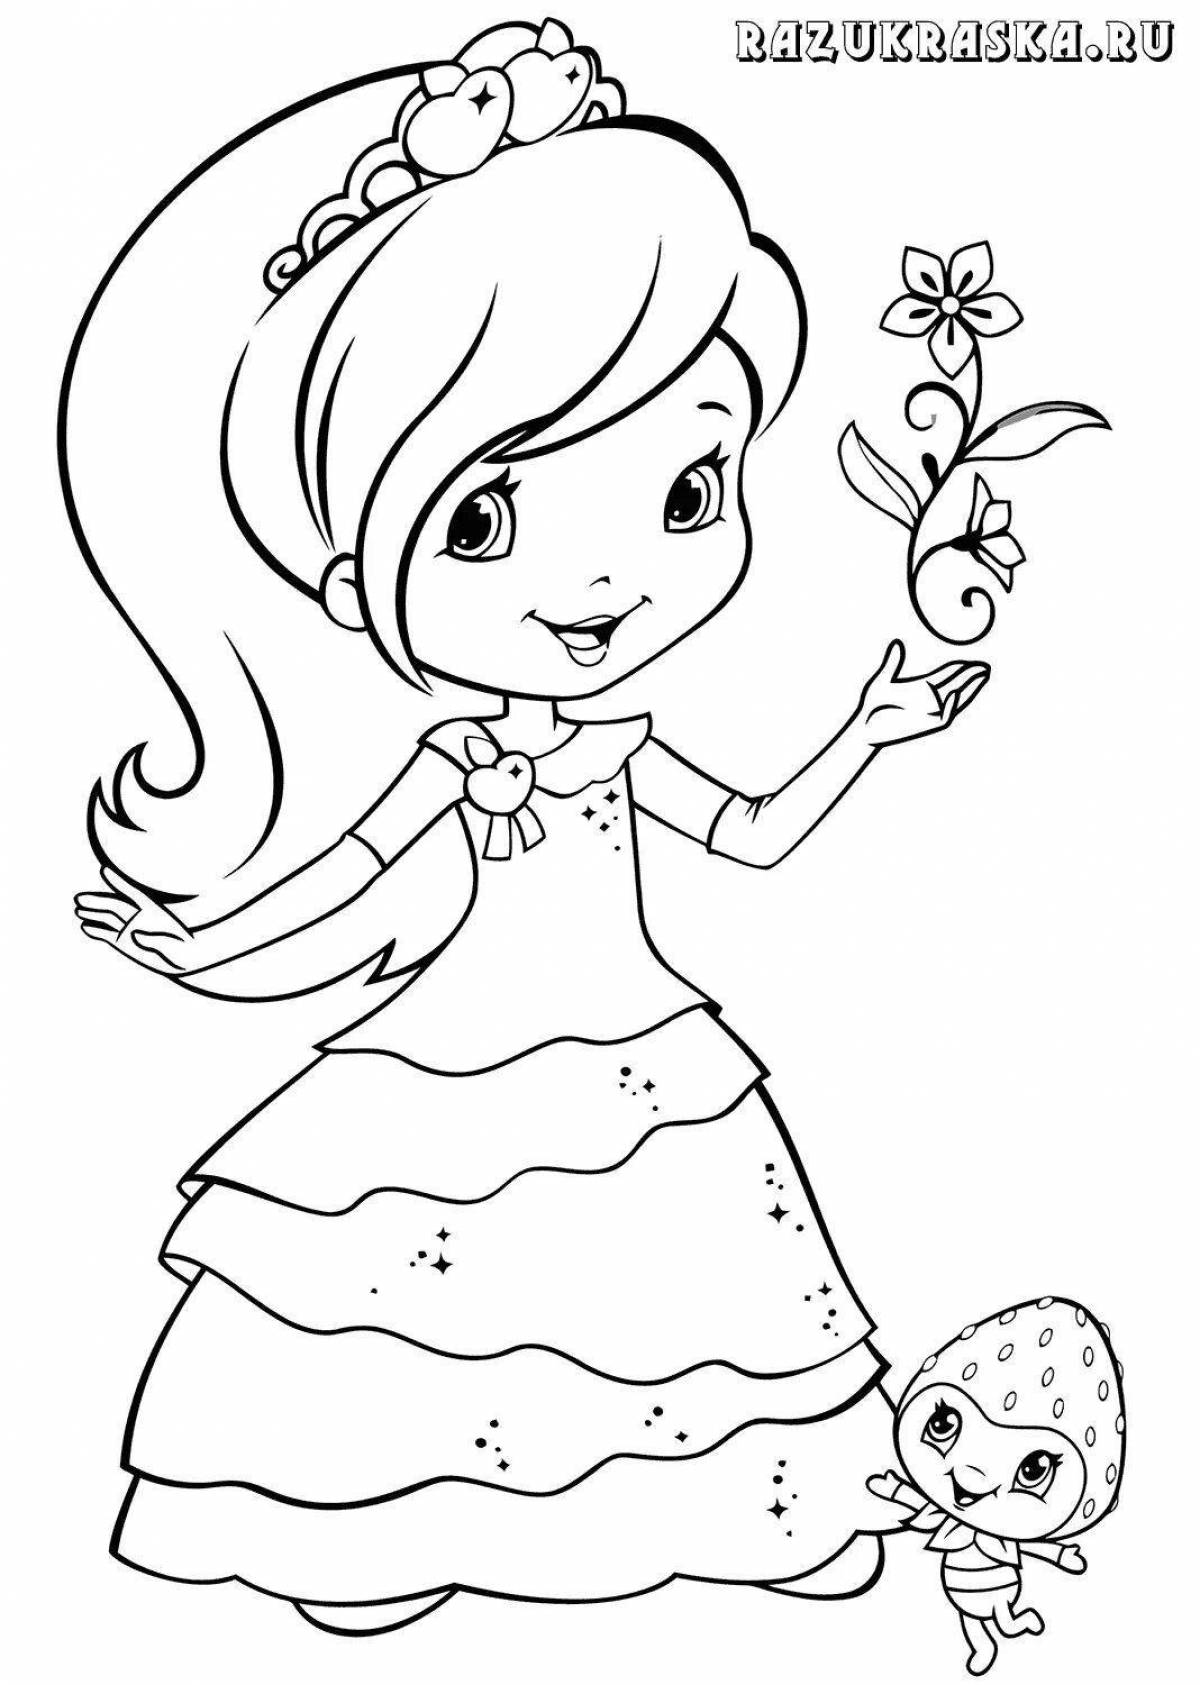 Coloring page cheerful crimson girl